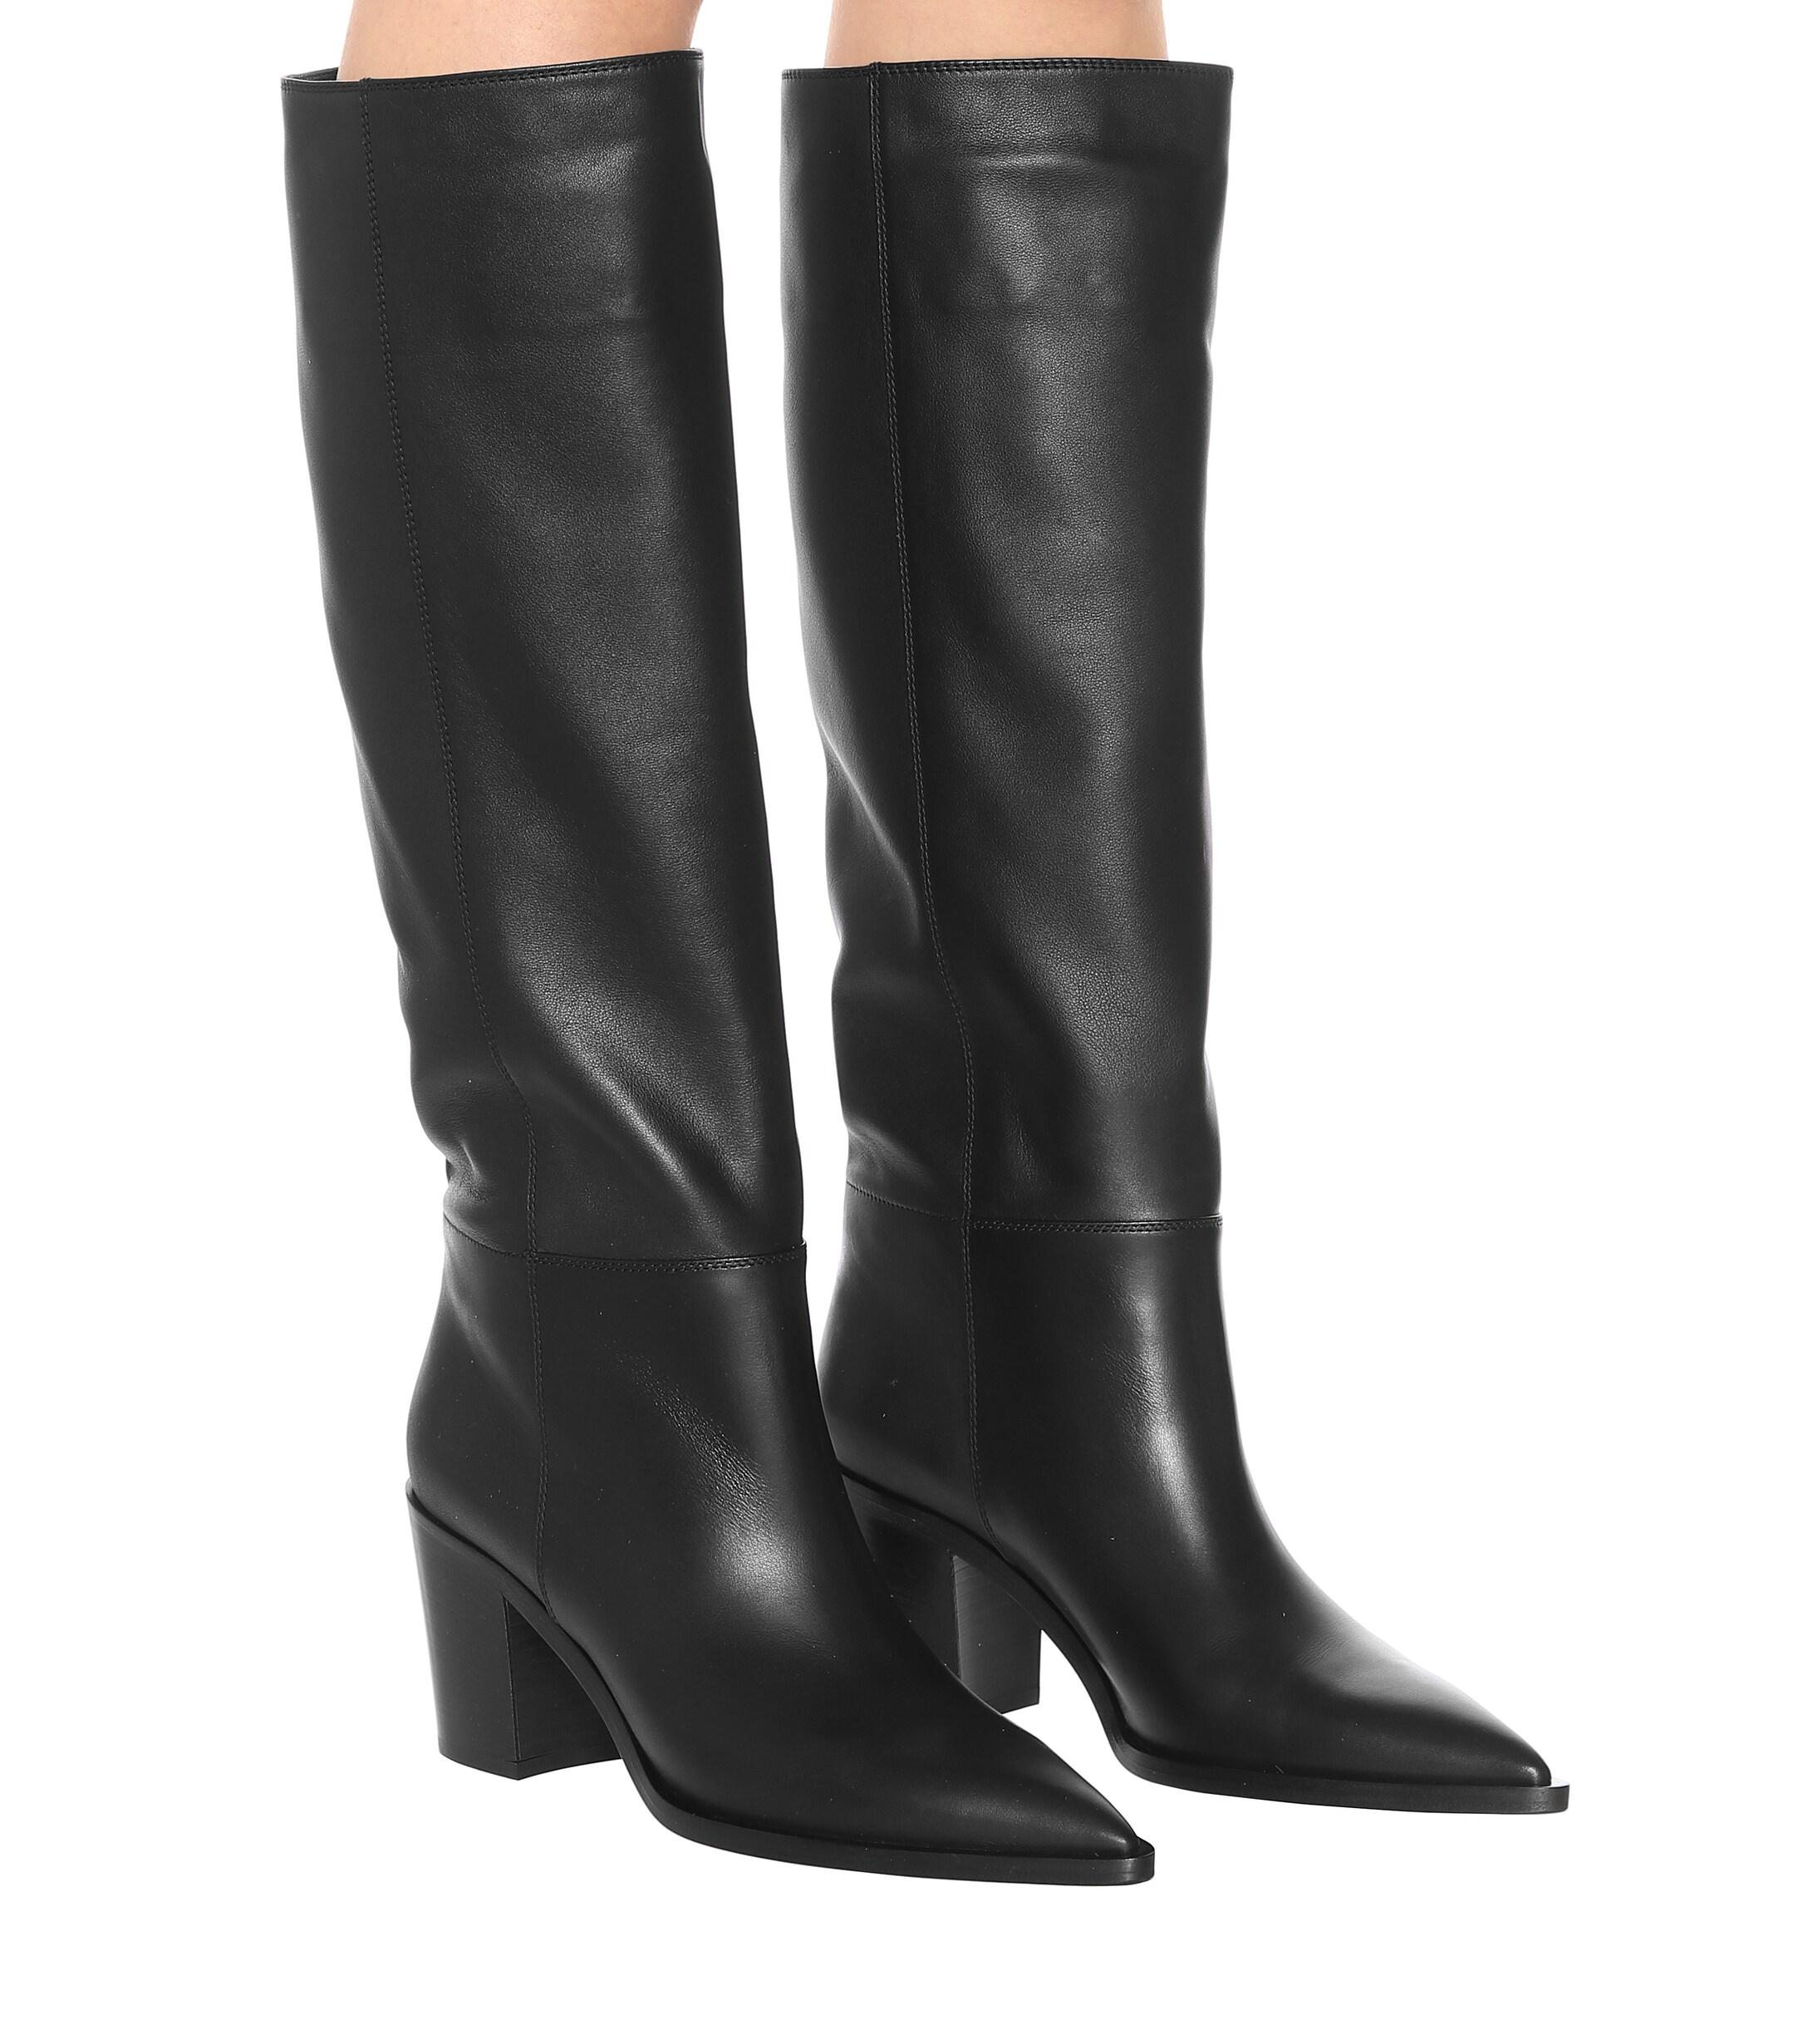 Gianvito Rossi Daenerys 70 Leather Boots in Black - Lyst